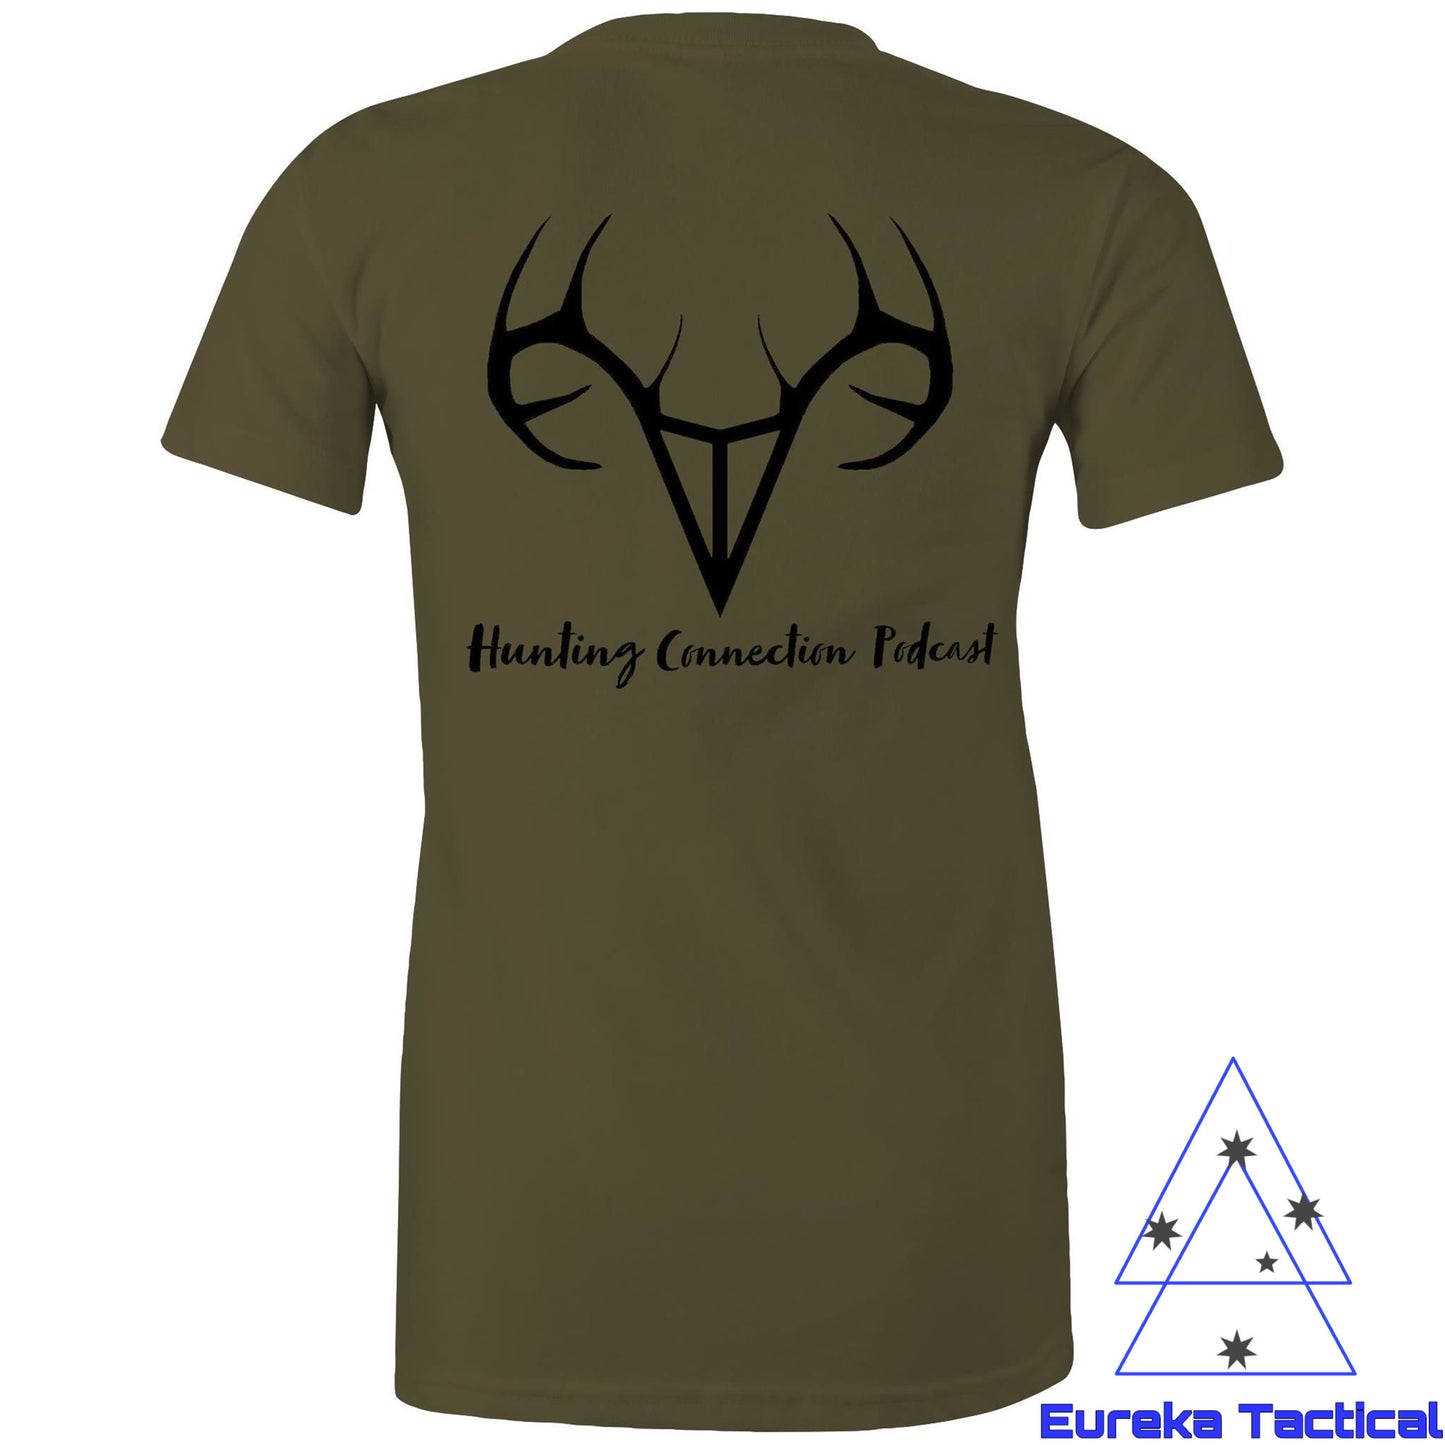 Hunting Connection Podcast Logo T-shirt. Official Merchandise. Women's AS Colour 100% cotton maple tee